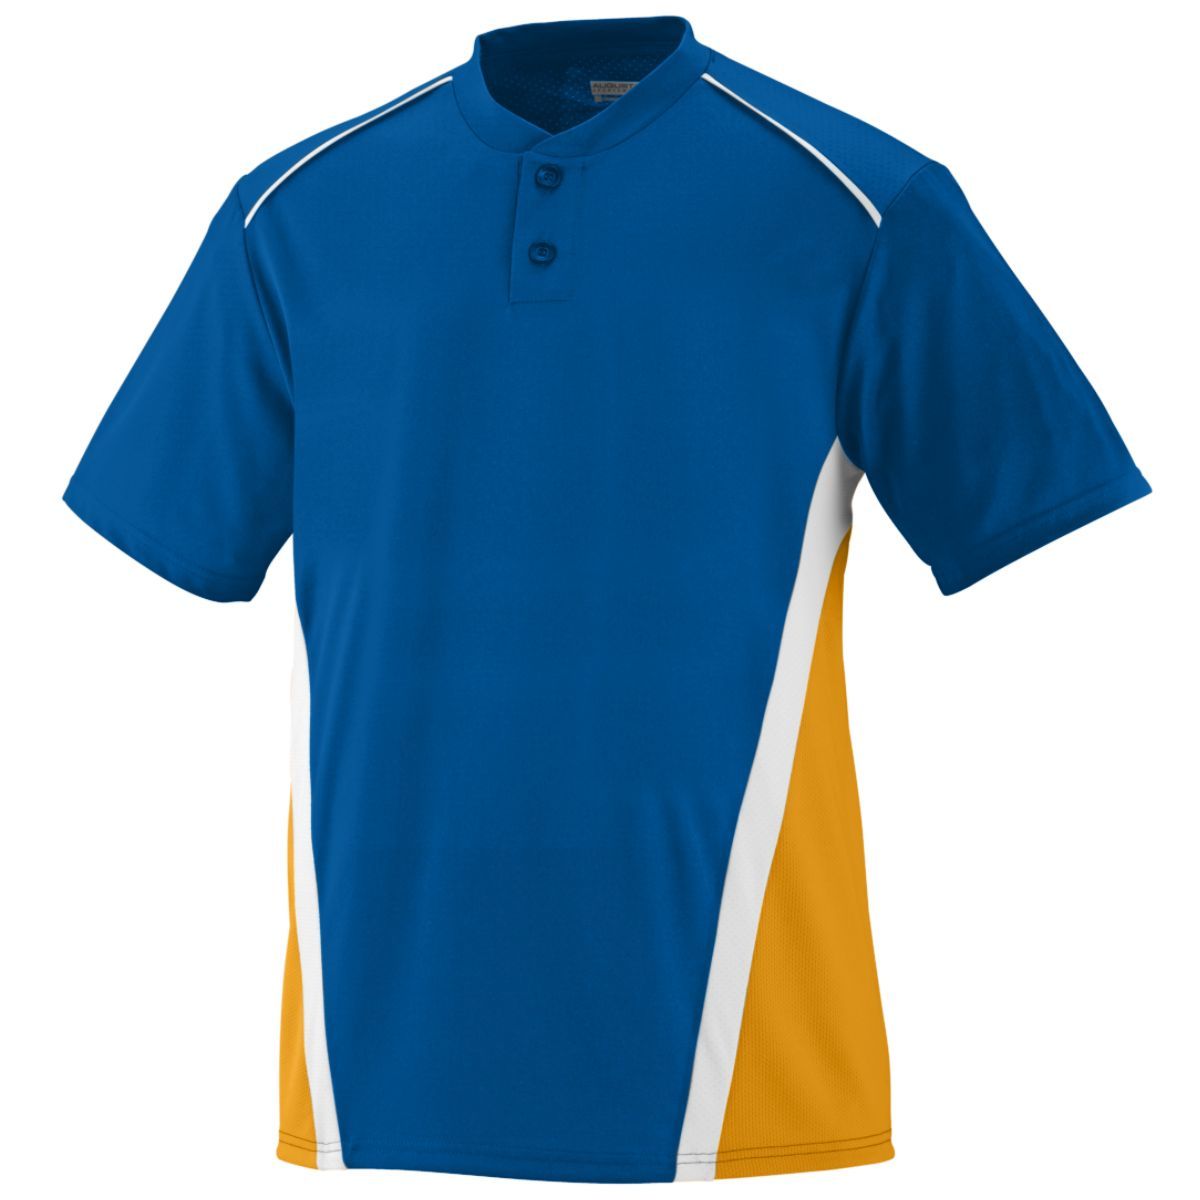 Augusta Sportswear Rbi Jersey in Royal/Gold/White  -Part of the Adult, Adult-Jersey, Augusta-Products, Softball, Shirts product lines at KanaleyCreations.com